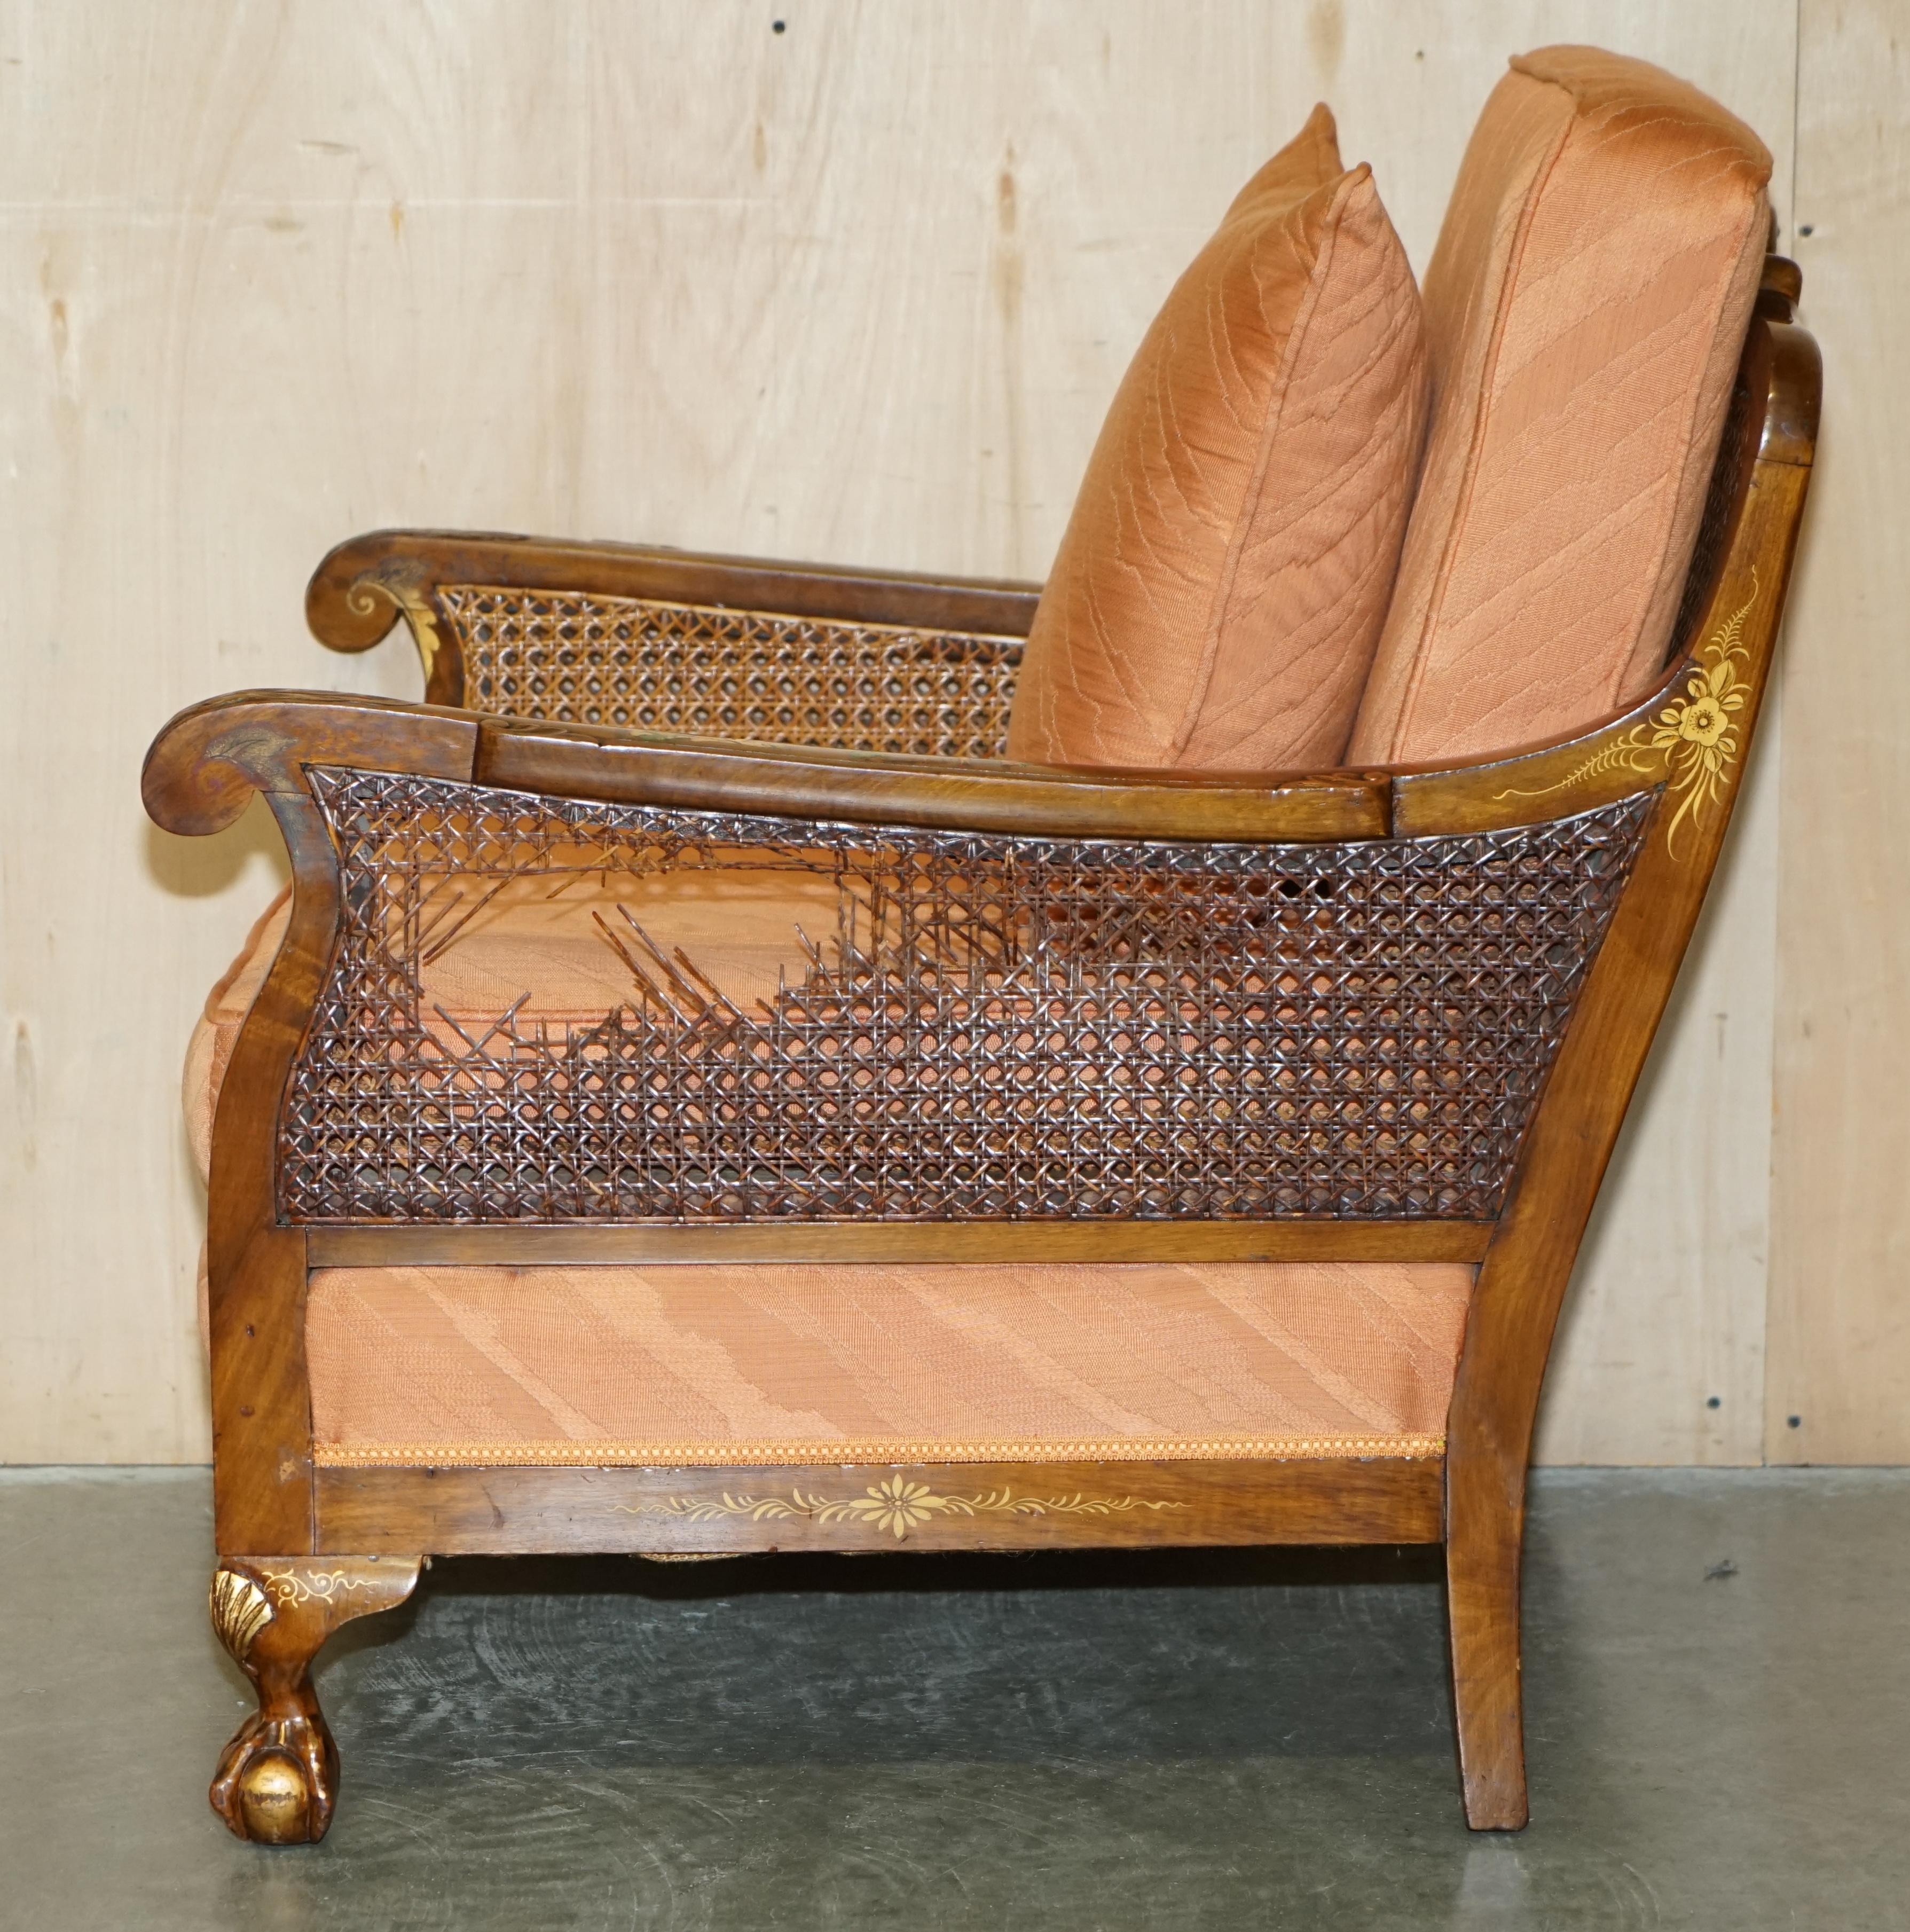 1920's WALNUT & CHINOISERIE 3 PIECE BERGERE SOFA ARMCHAIR SUITE FOR RESTORATION For Sale 11